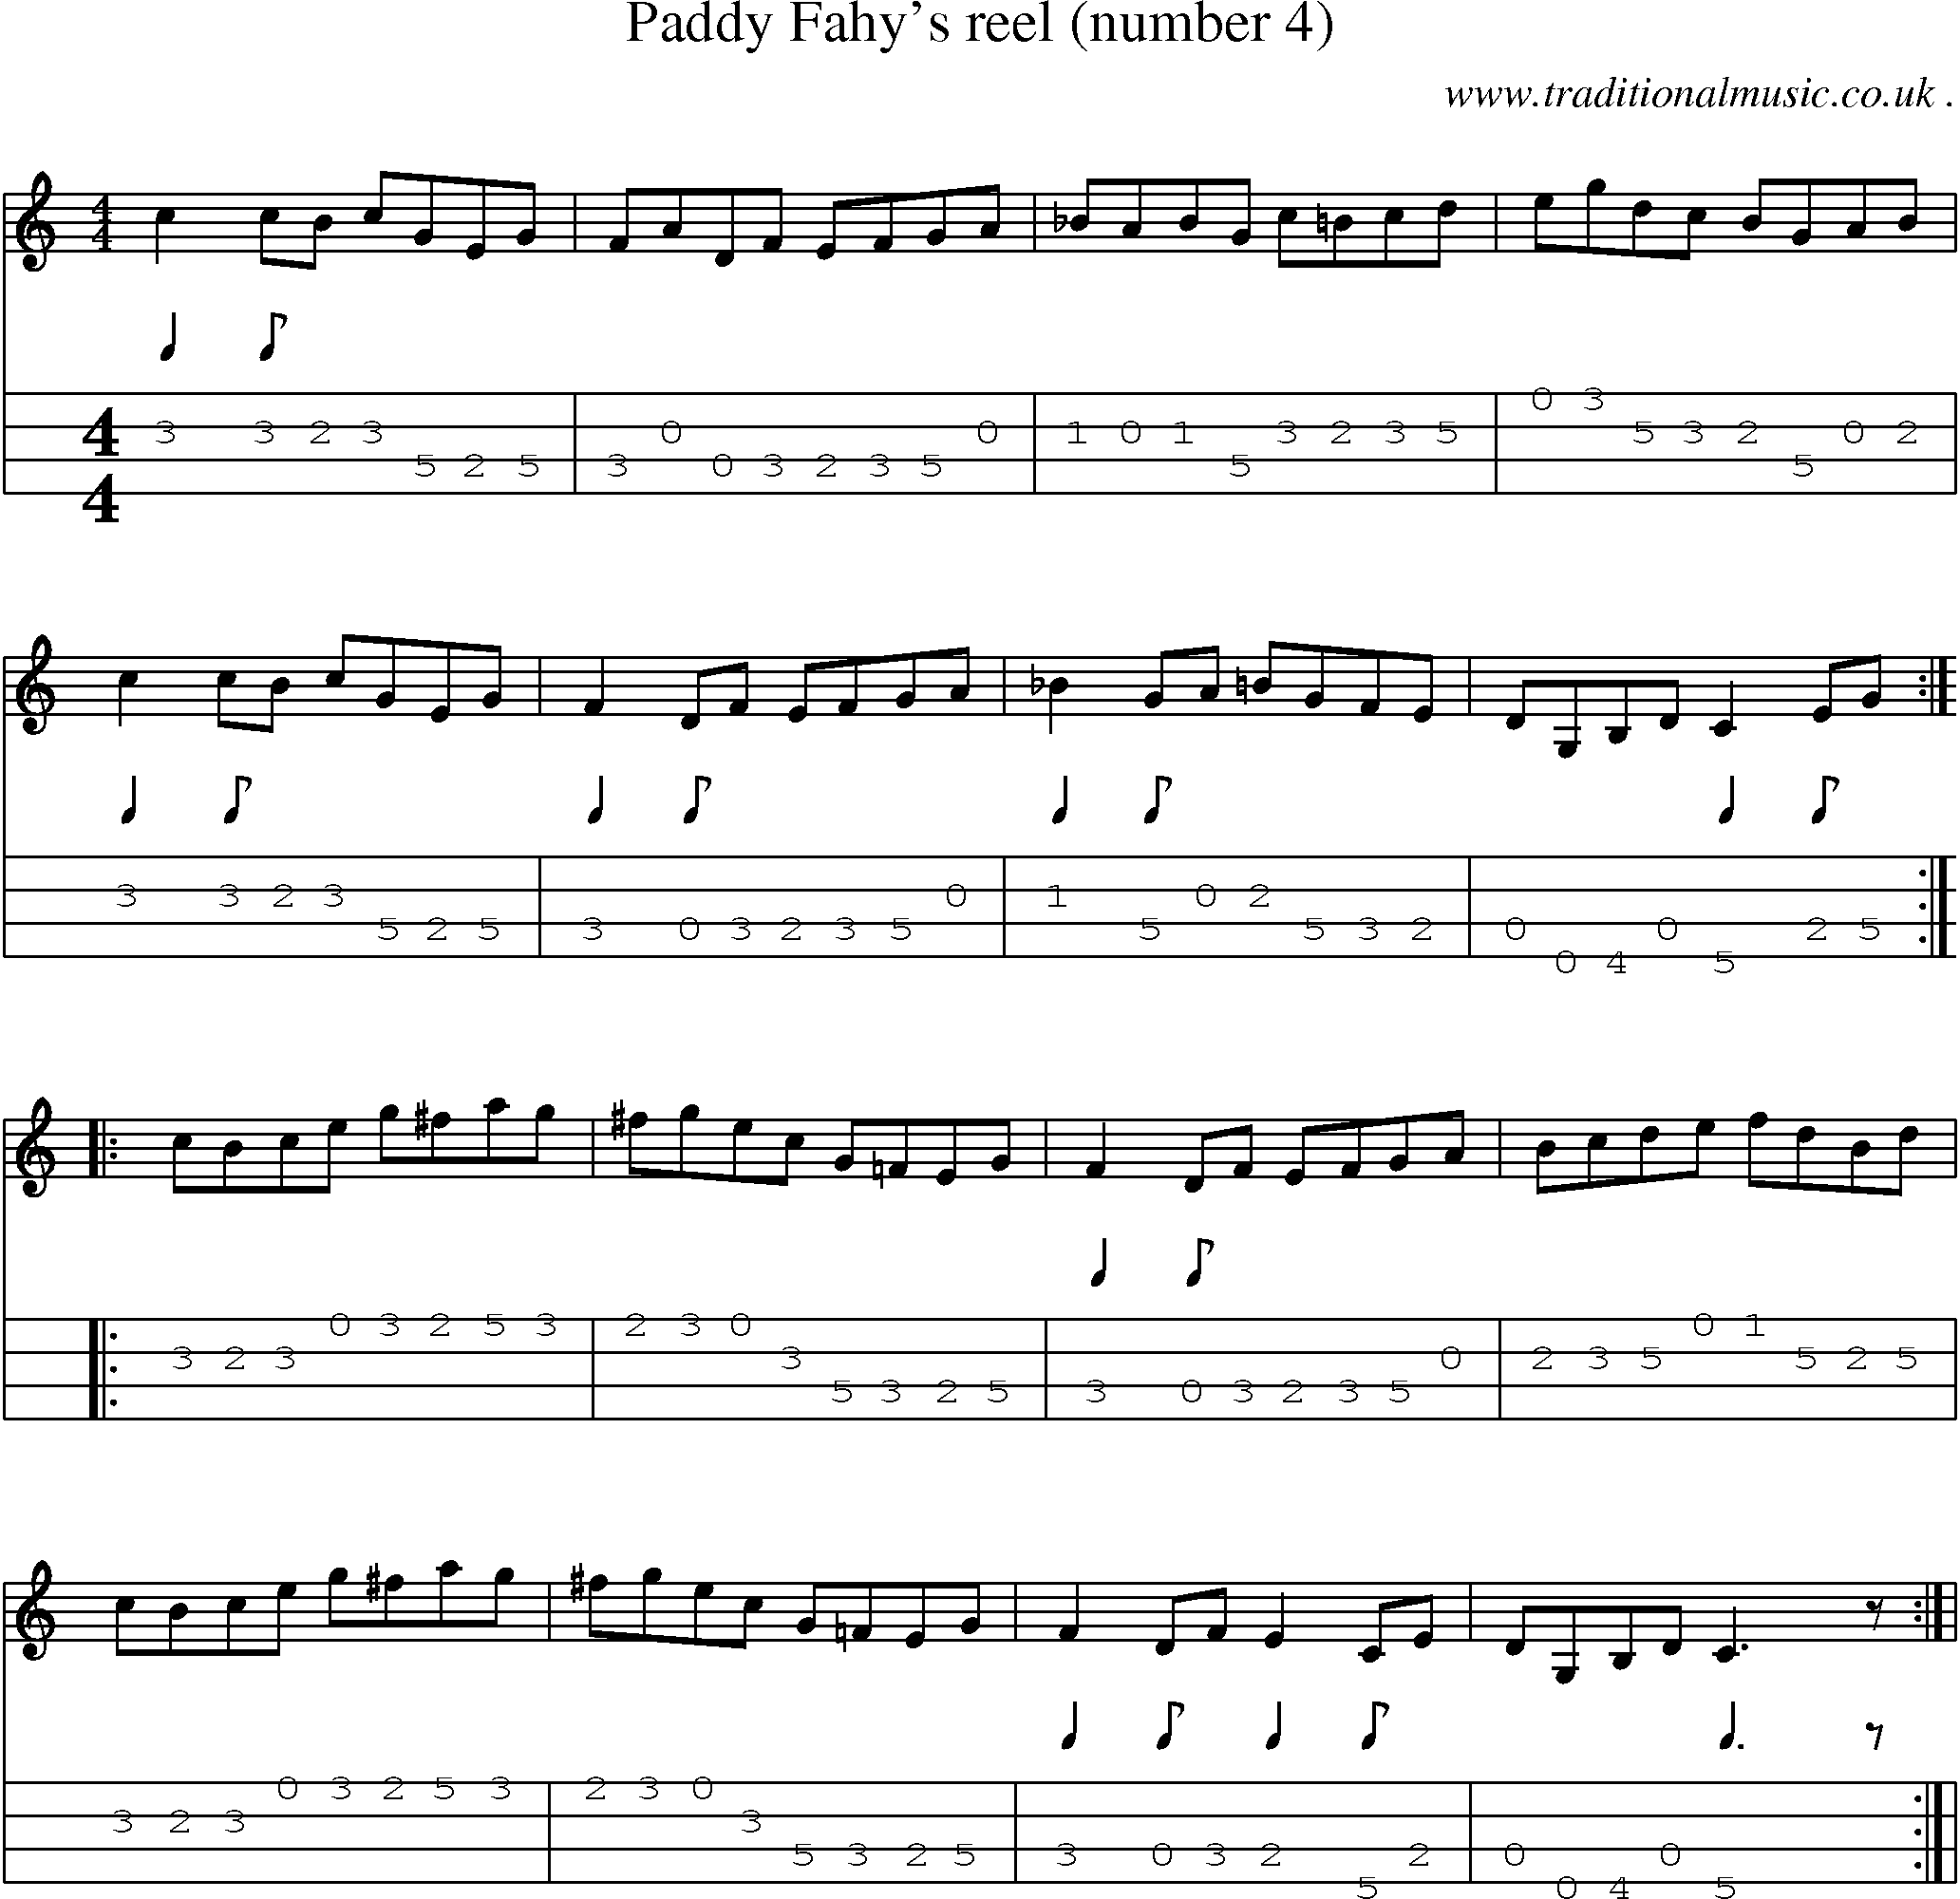 Sheet-music  score, Chords and Mandolin Tabs for Paddy Fahys Reel Number 4